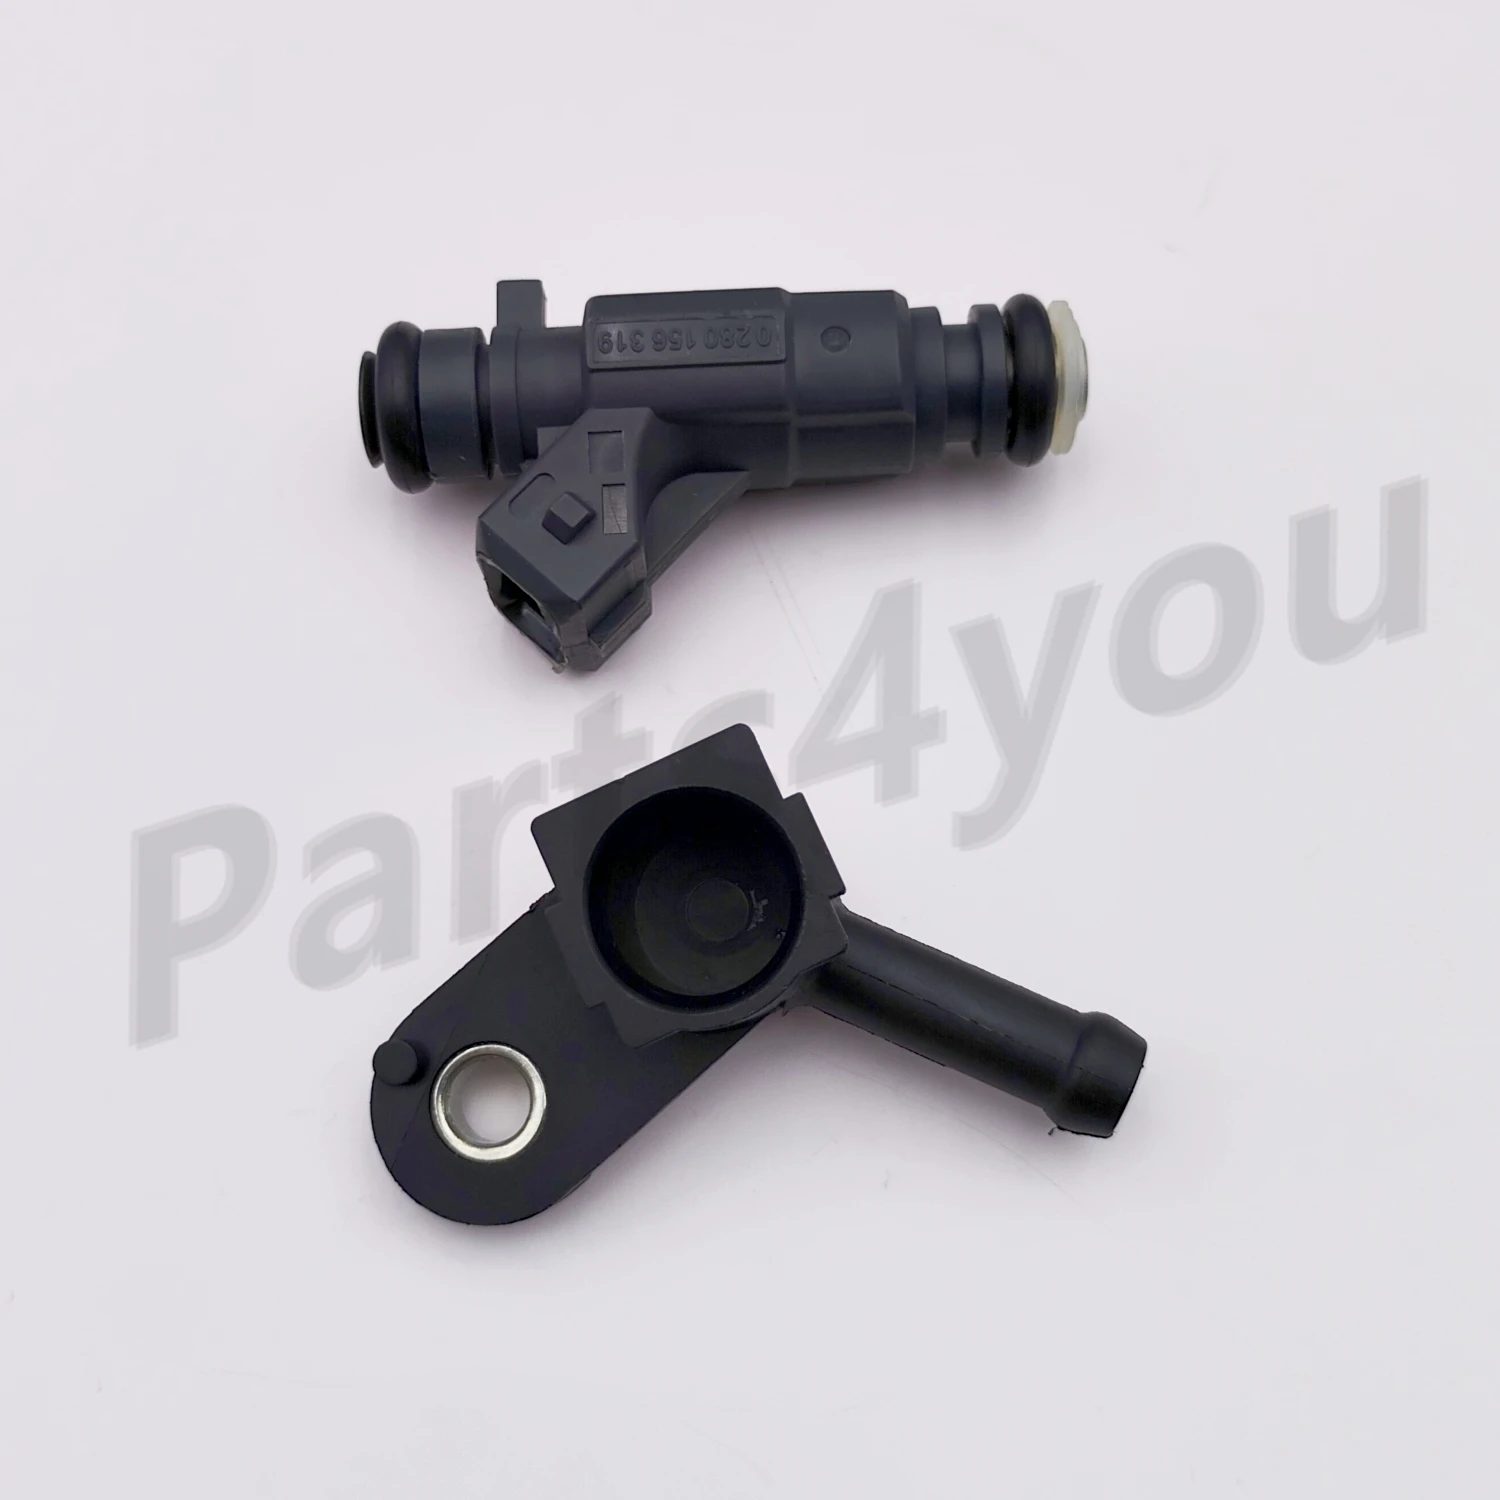 Injector with Injector Cap Kit for CFmoto 500 X5 CF188 600 X6 U6 Z6 625 CF196 X-Lander Rancher Goes 625i 018B-171000 018B-170002 oil pump assy for cfmoto cf196 u6 600cc x6 600 z6 625 cf188 500cc x5 500 cf500 cf600 0180 071000 cf188 071000 goes 520 powermax